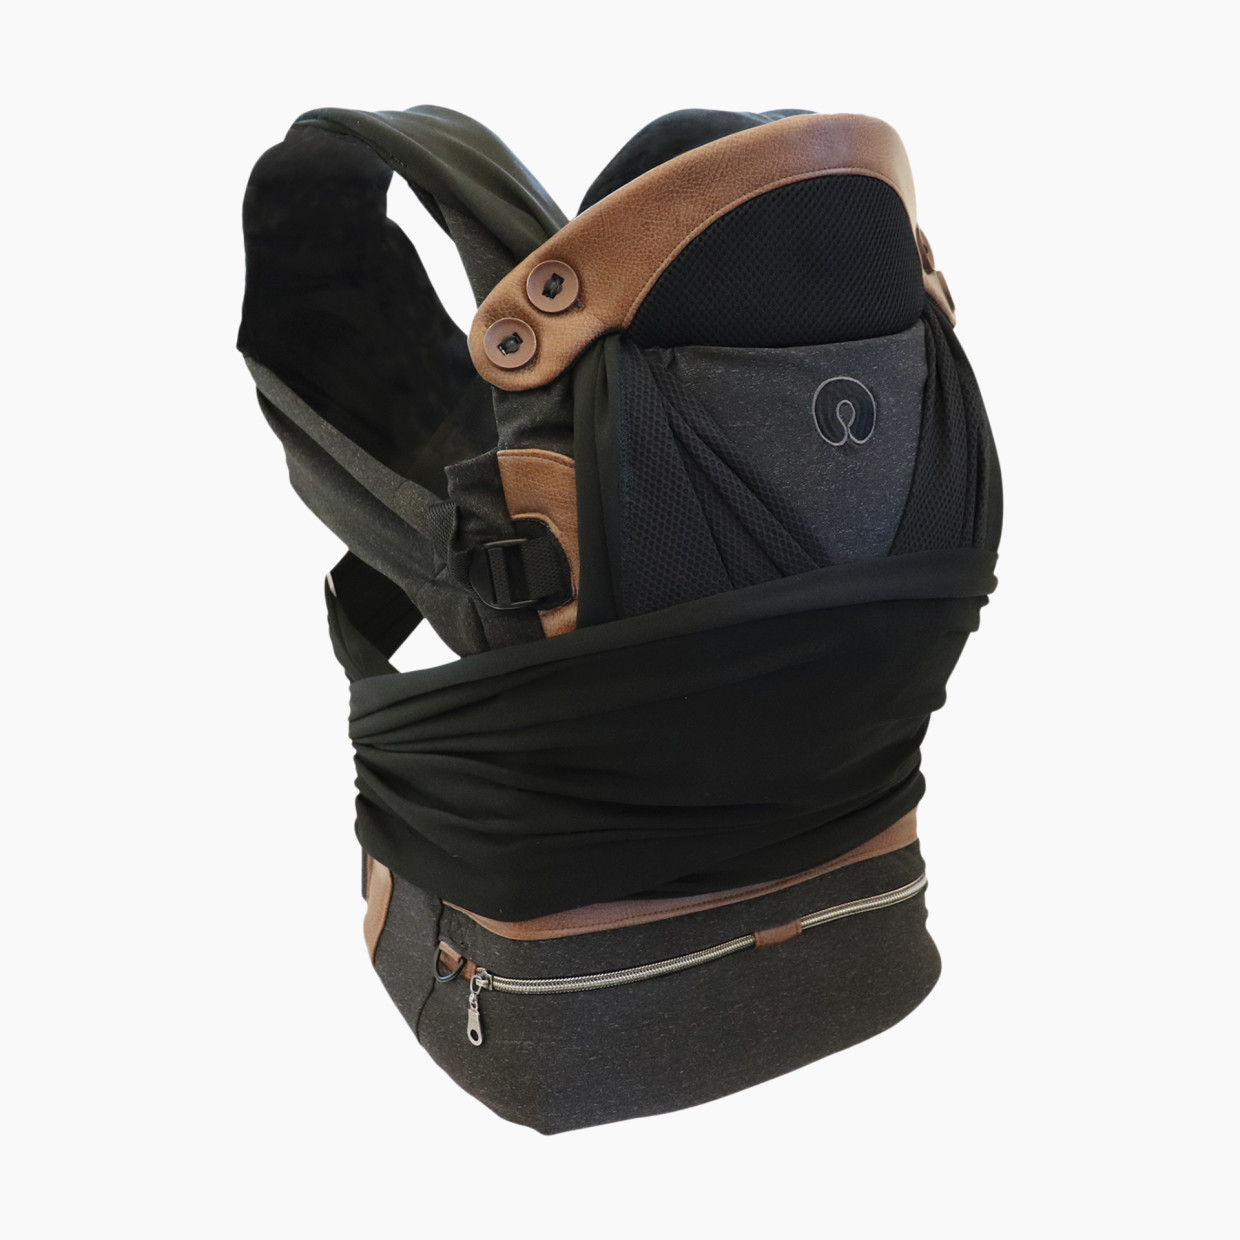 Boppy ComfyChic Hybrid Baby Carrier - Charcoal.